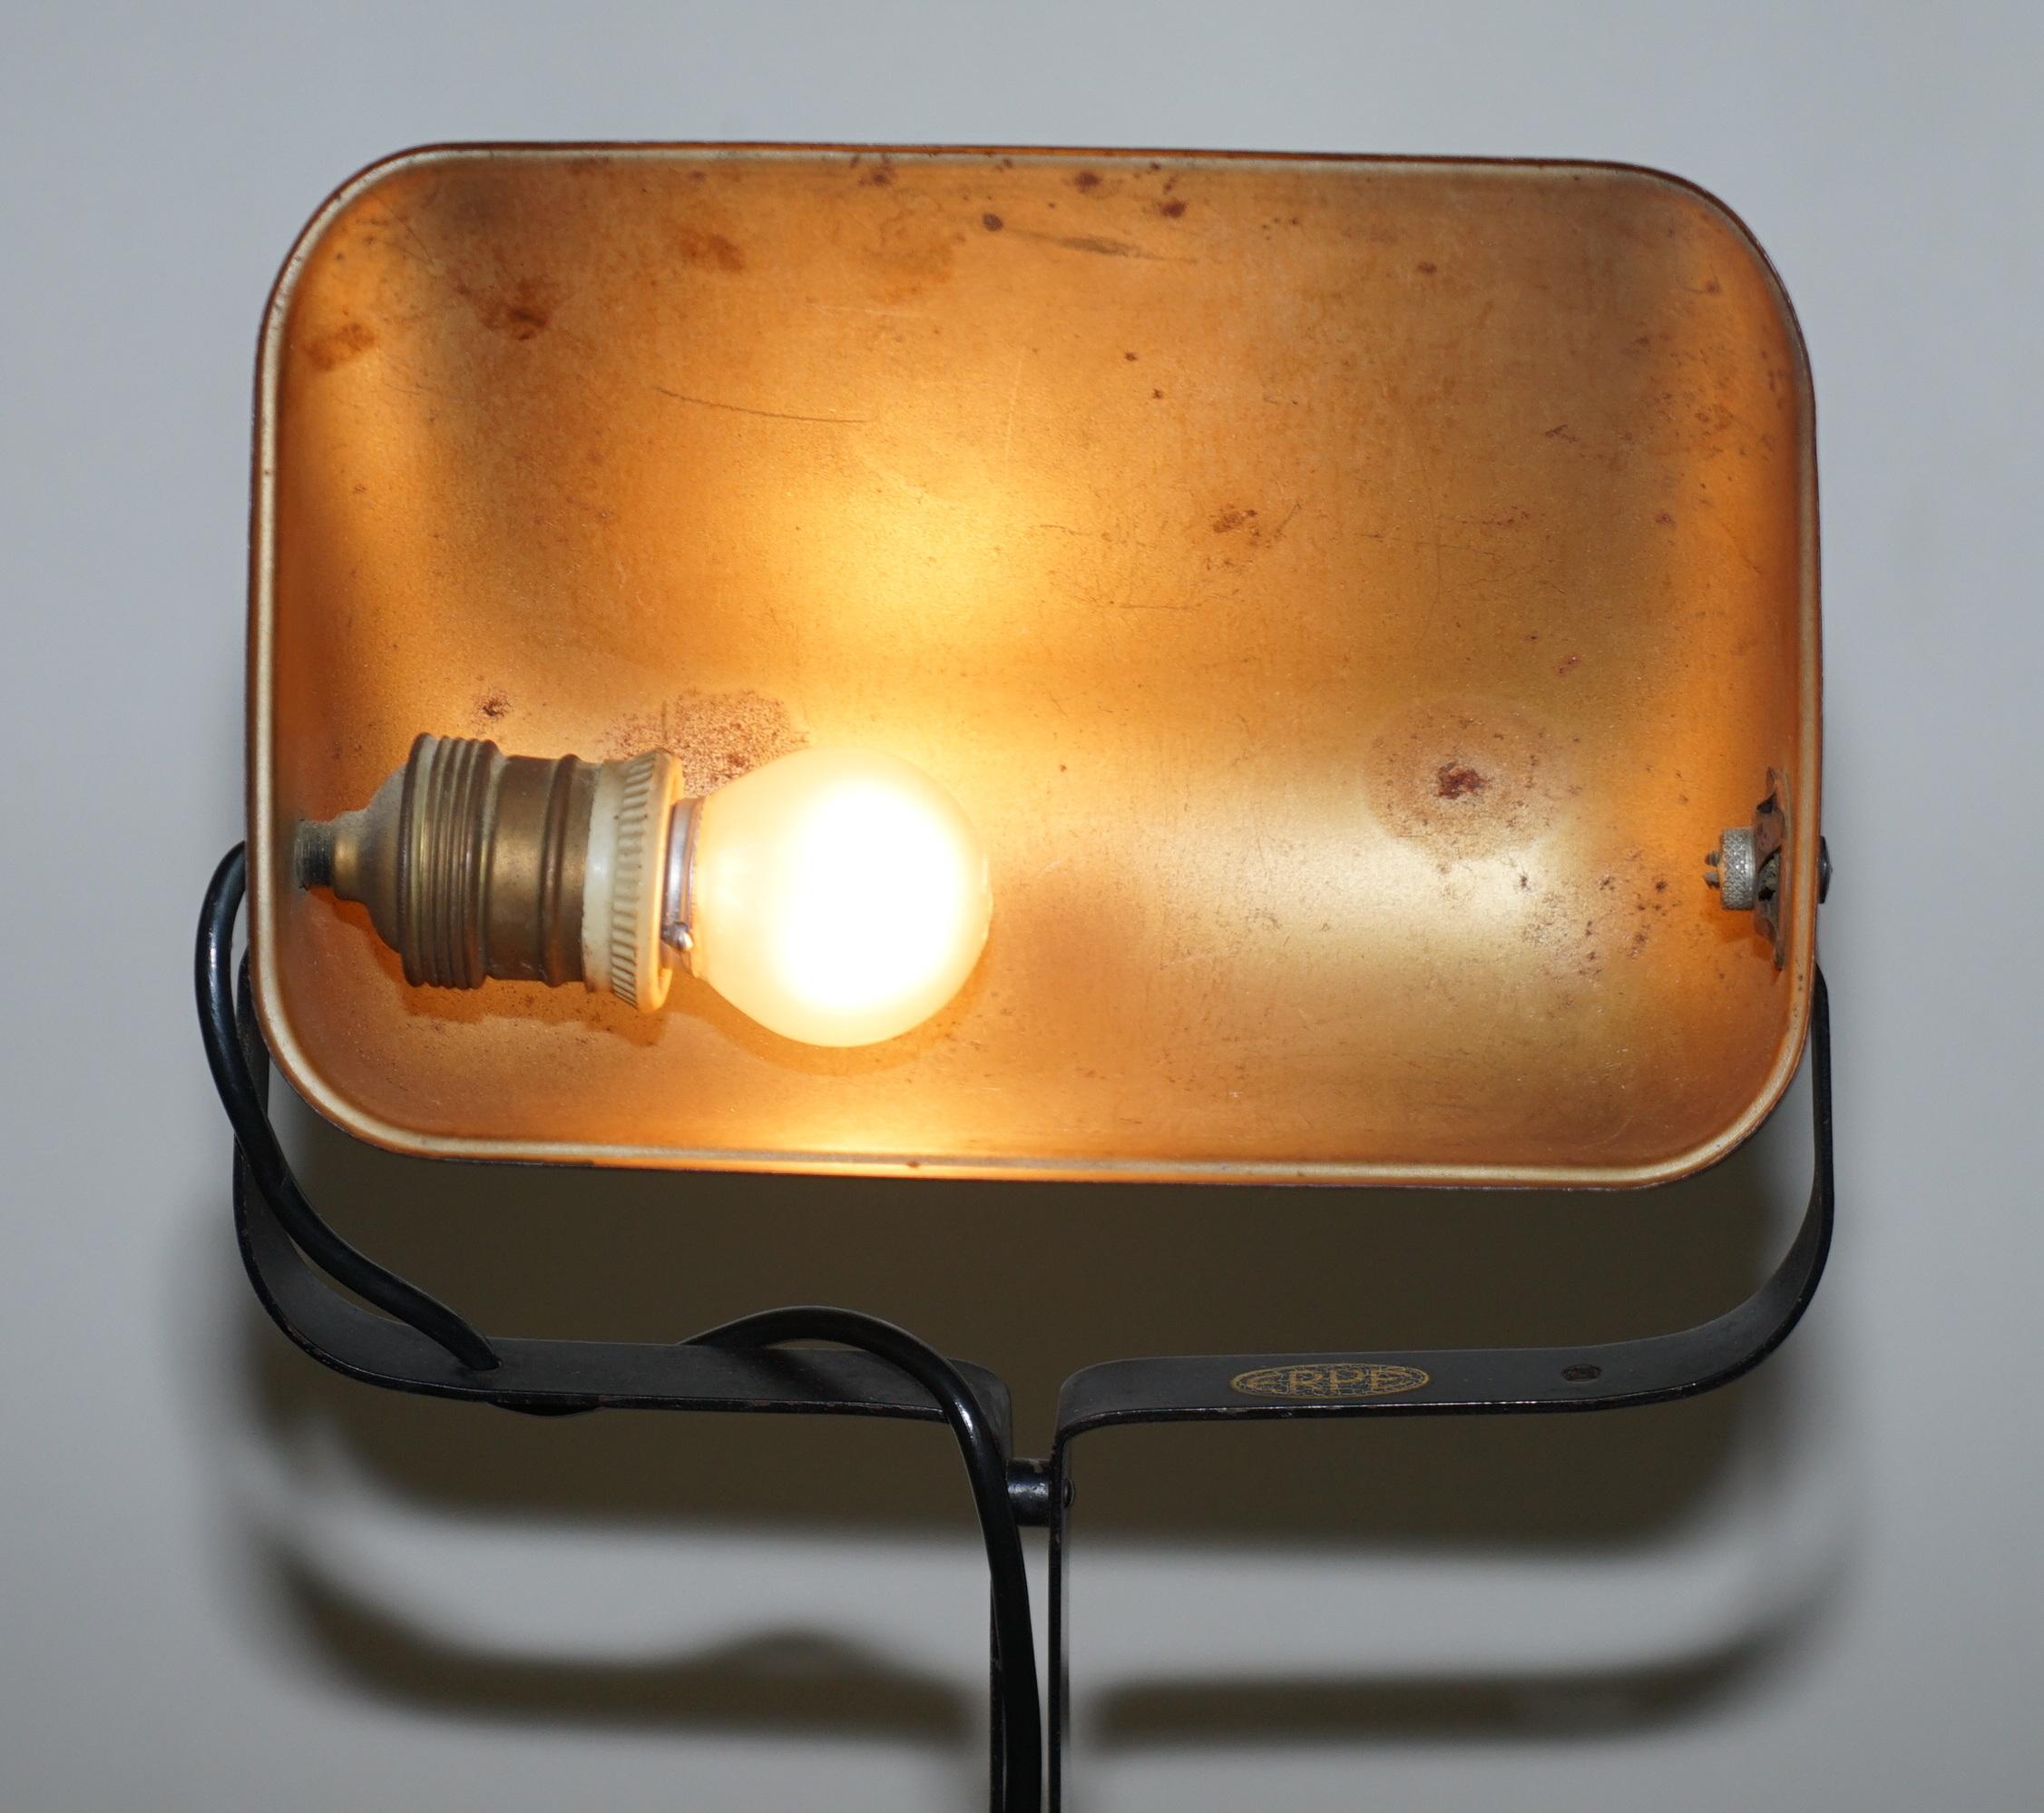 Hand-Crafted Original circa 1930s Erpe Bankers Lamp with Three Step Base and Original Switch